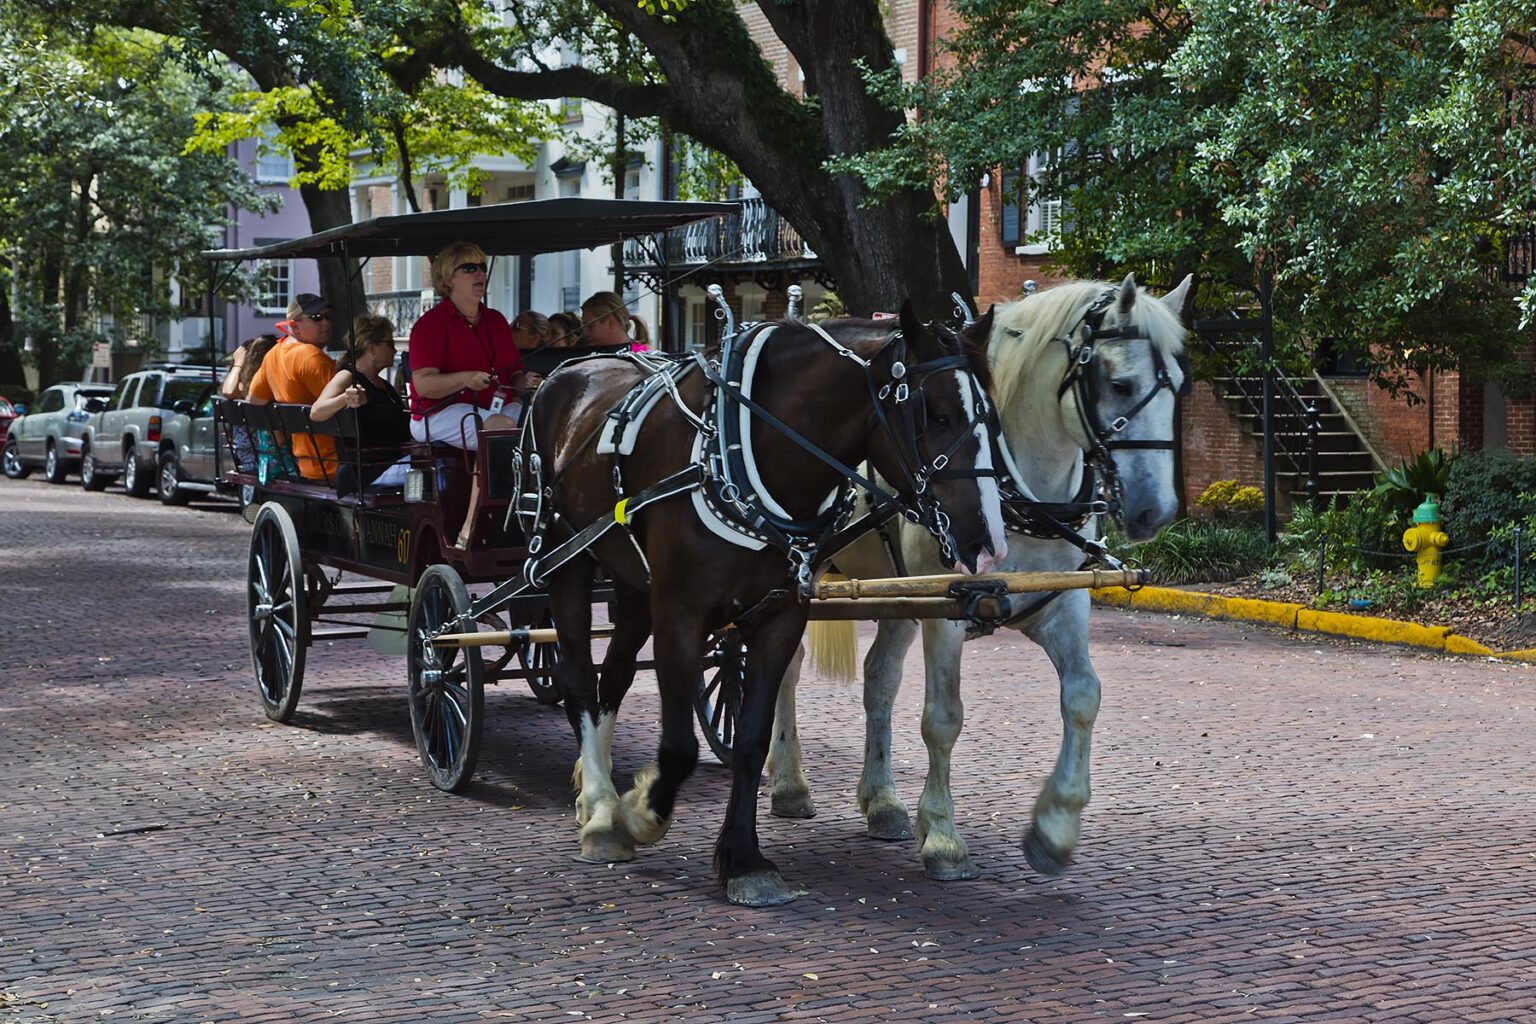 Tourists take a horse and buggy ride through the southern style mansions in the historical section of SAVANNA GEORGIA